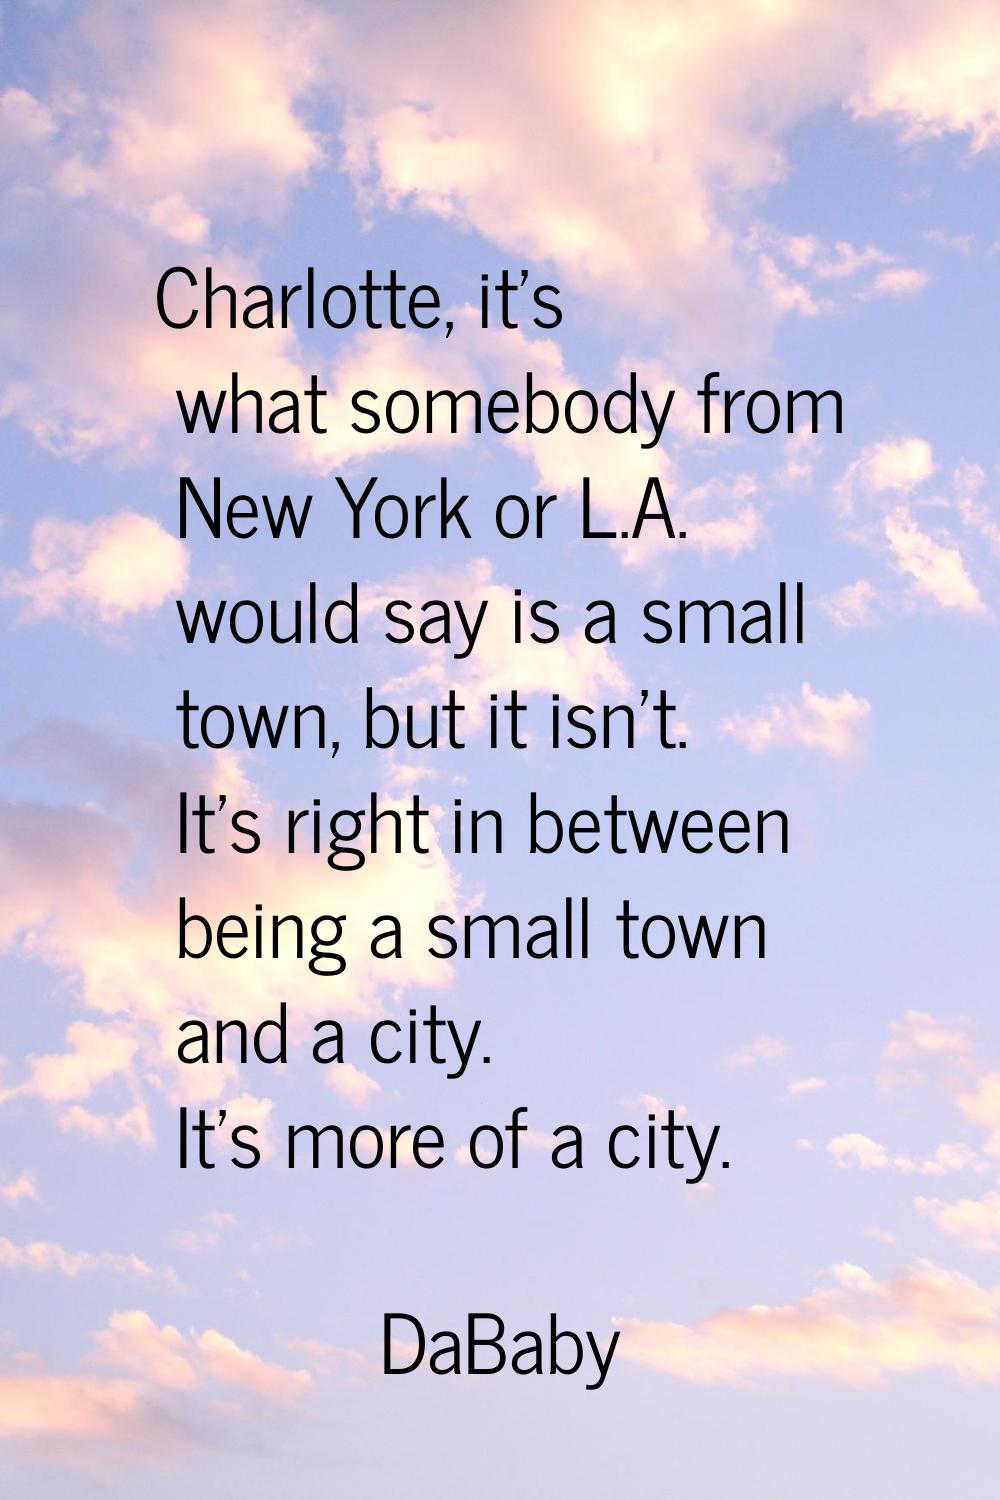 Charlotte, it's what somebody from New York or L.A. would say is a small town, but it isn't. It's r